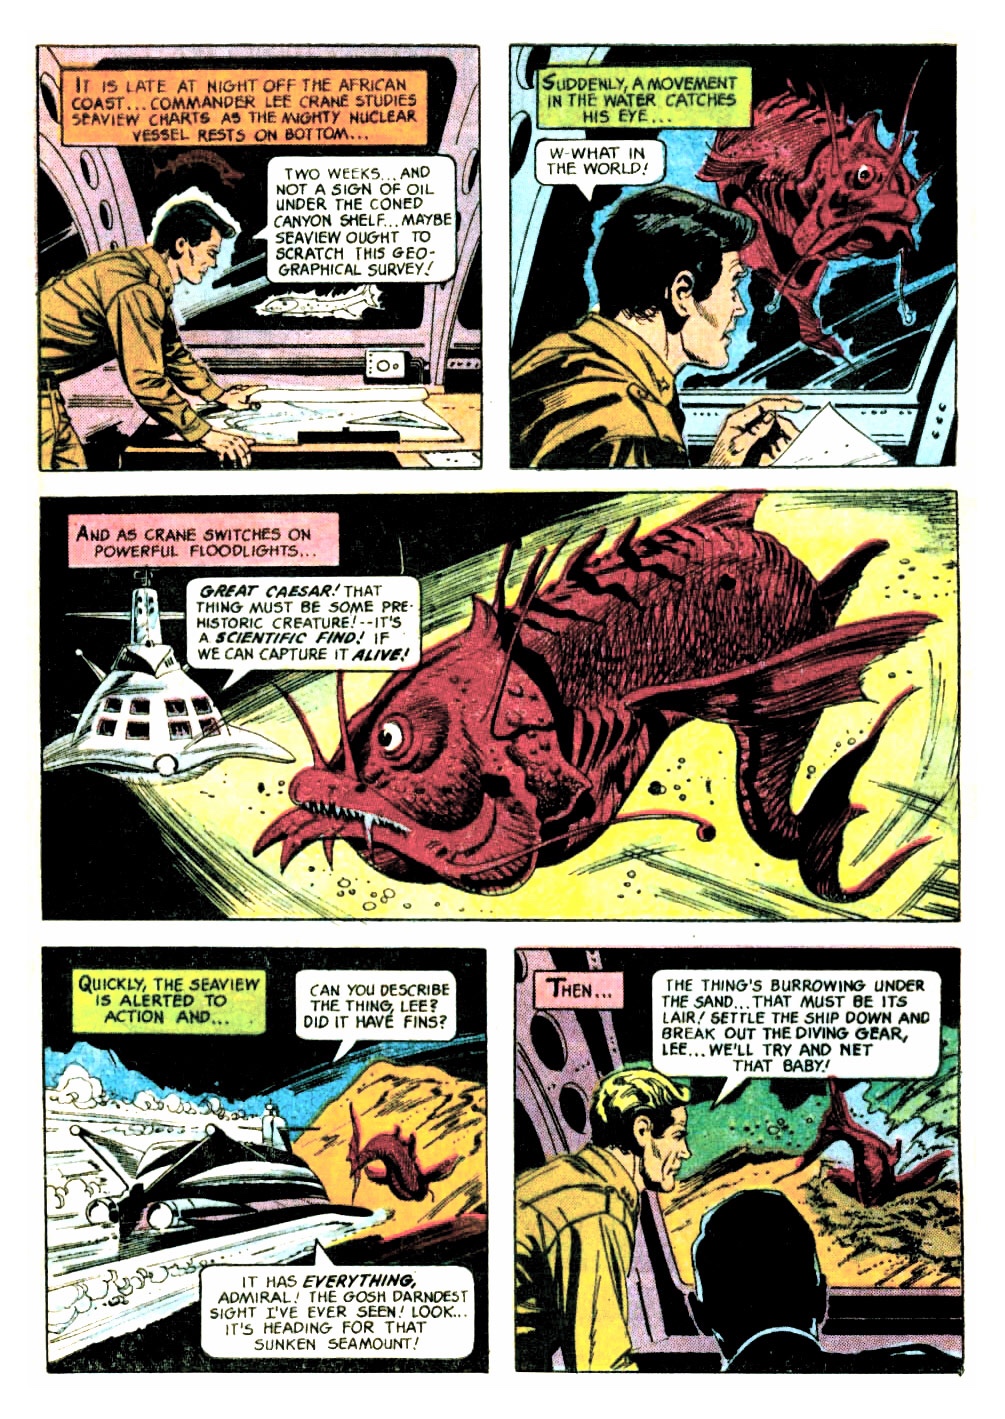 A page from Gold Key’s Voyage to the Bottom of the Sea #5 - art by Alberto Giolitti 